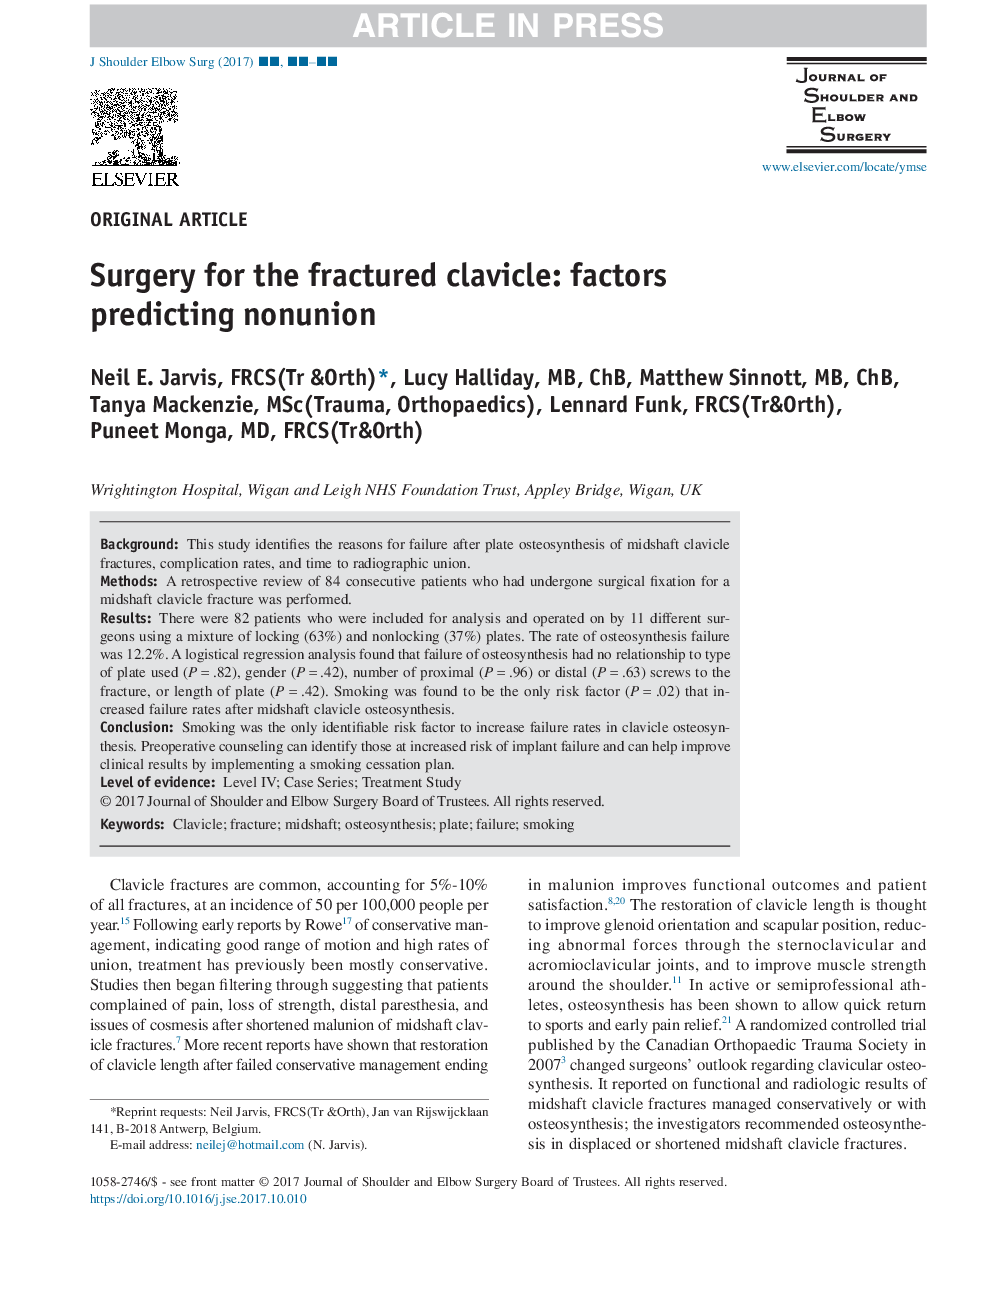 Surgery for the fractured clavicle: factors predicting nonunion